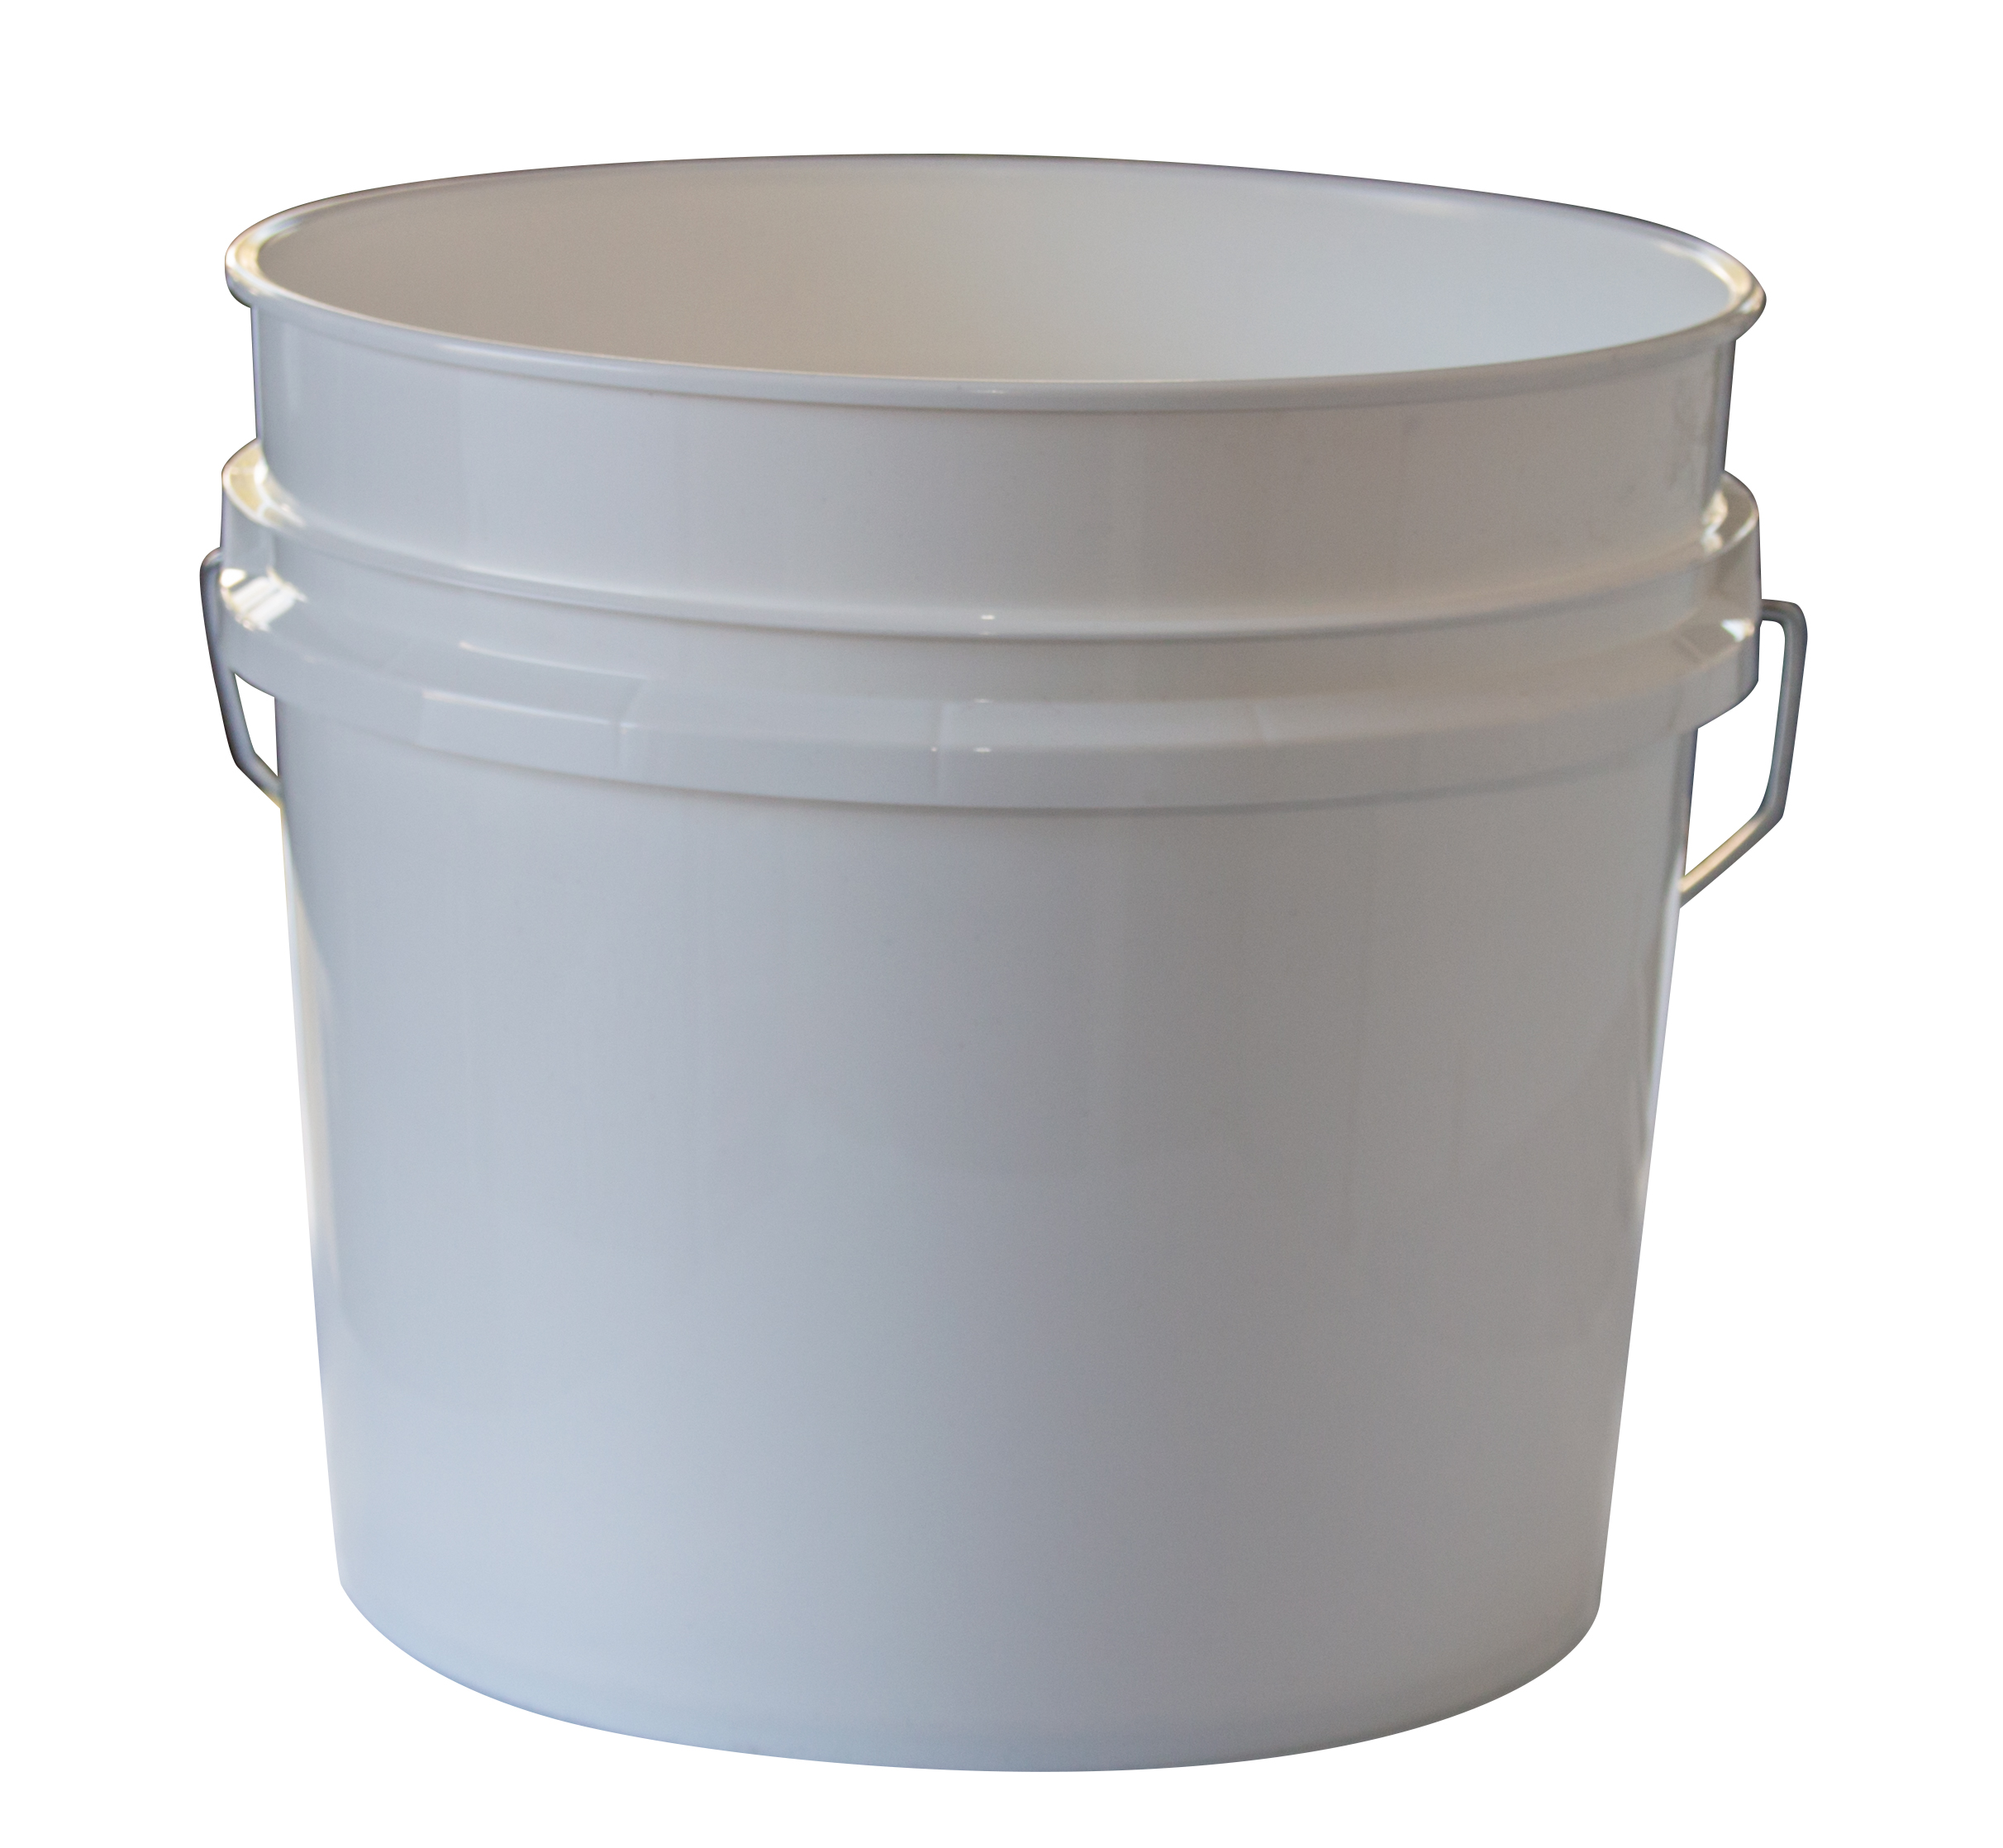 Argee 3.5 Gallon White Bucket, 10-Pack